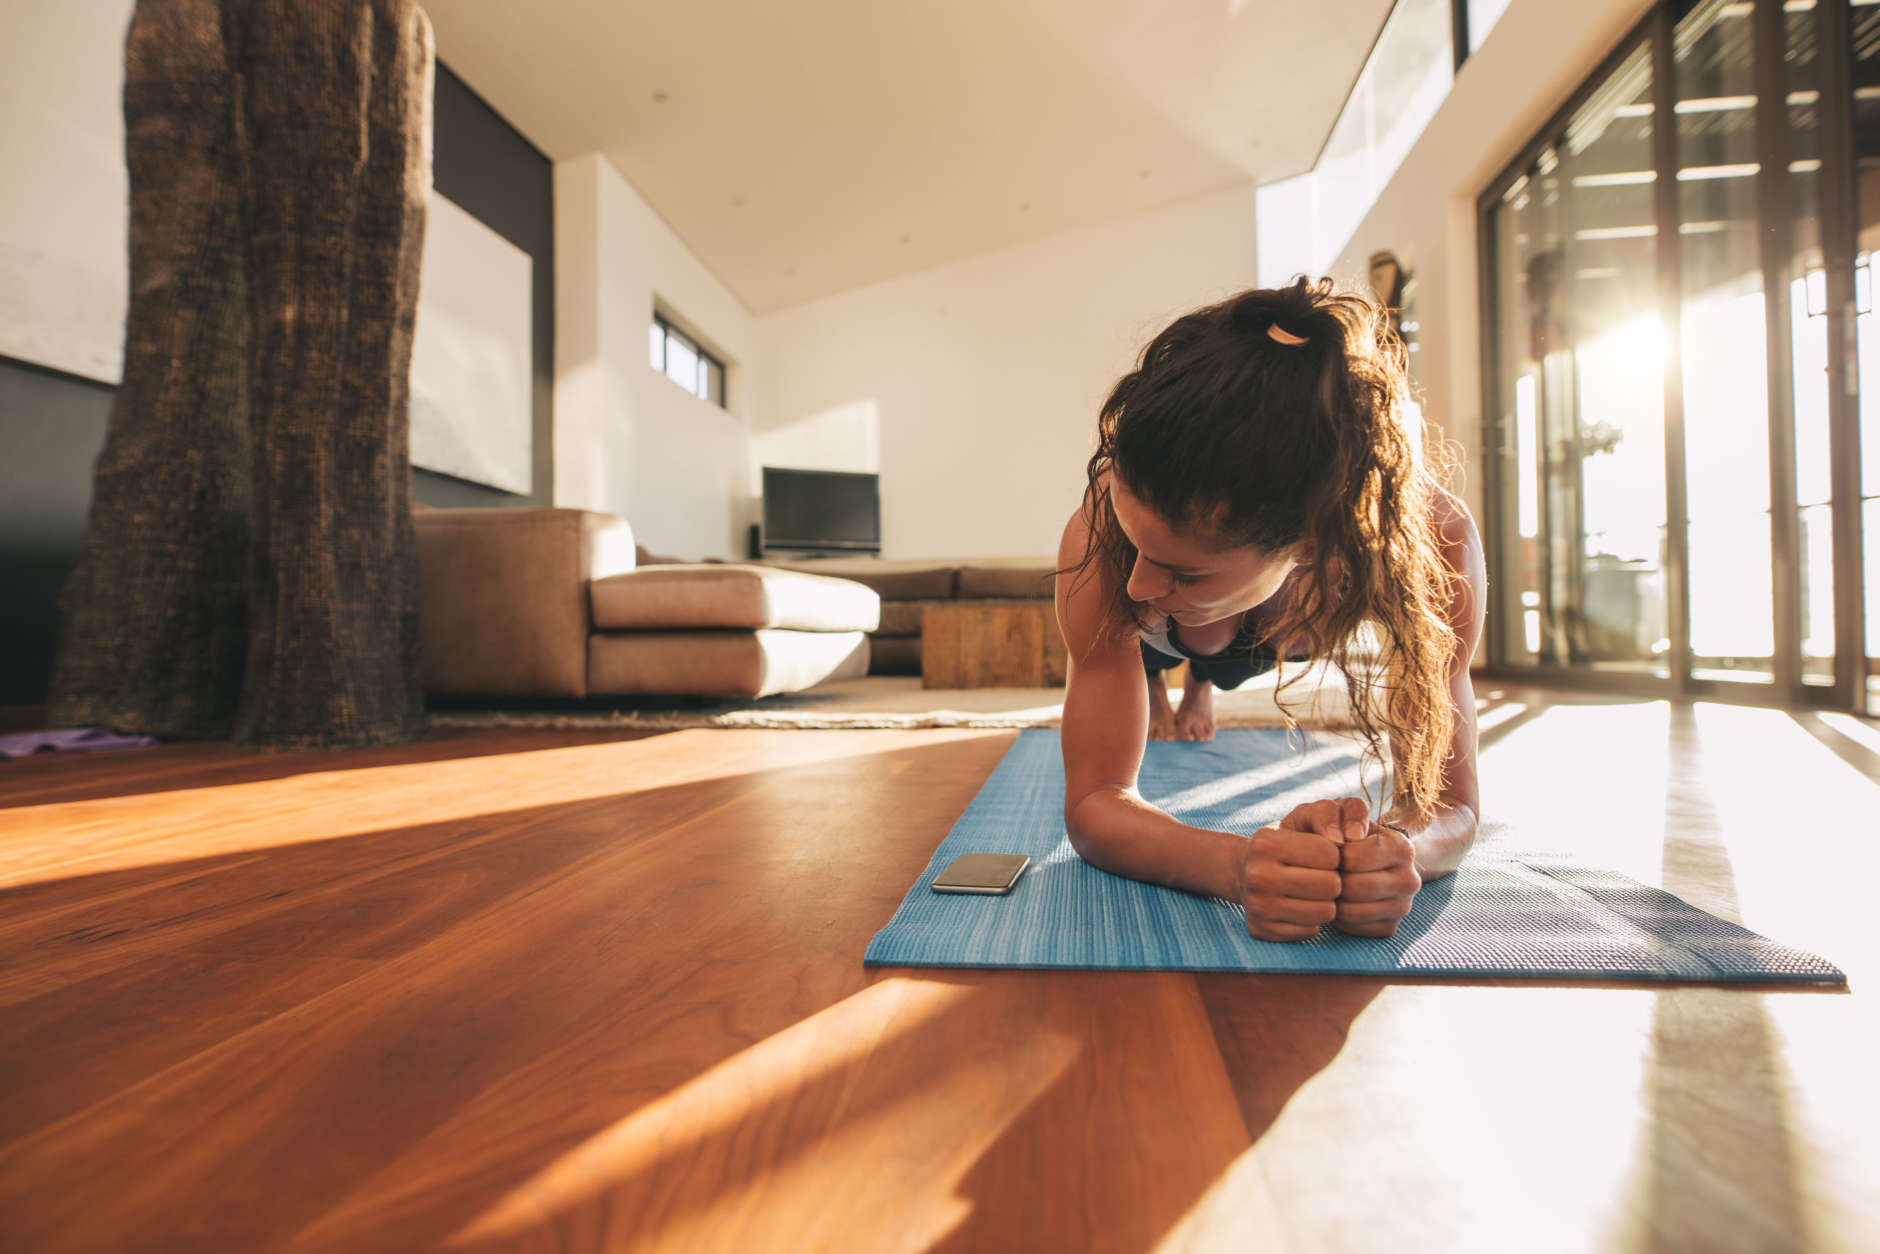 Keep your phone away is one of the unwritten yoga etiquette rules. (Thinkstock)